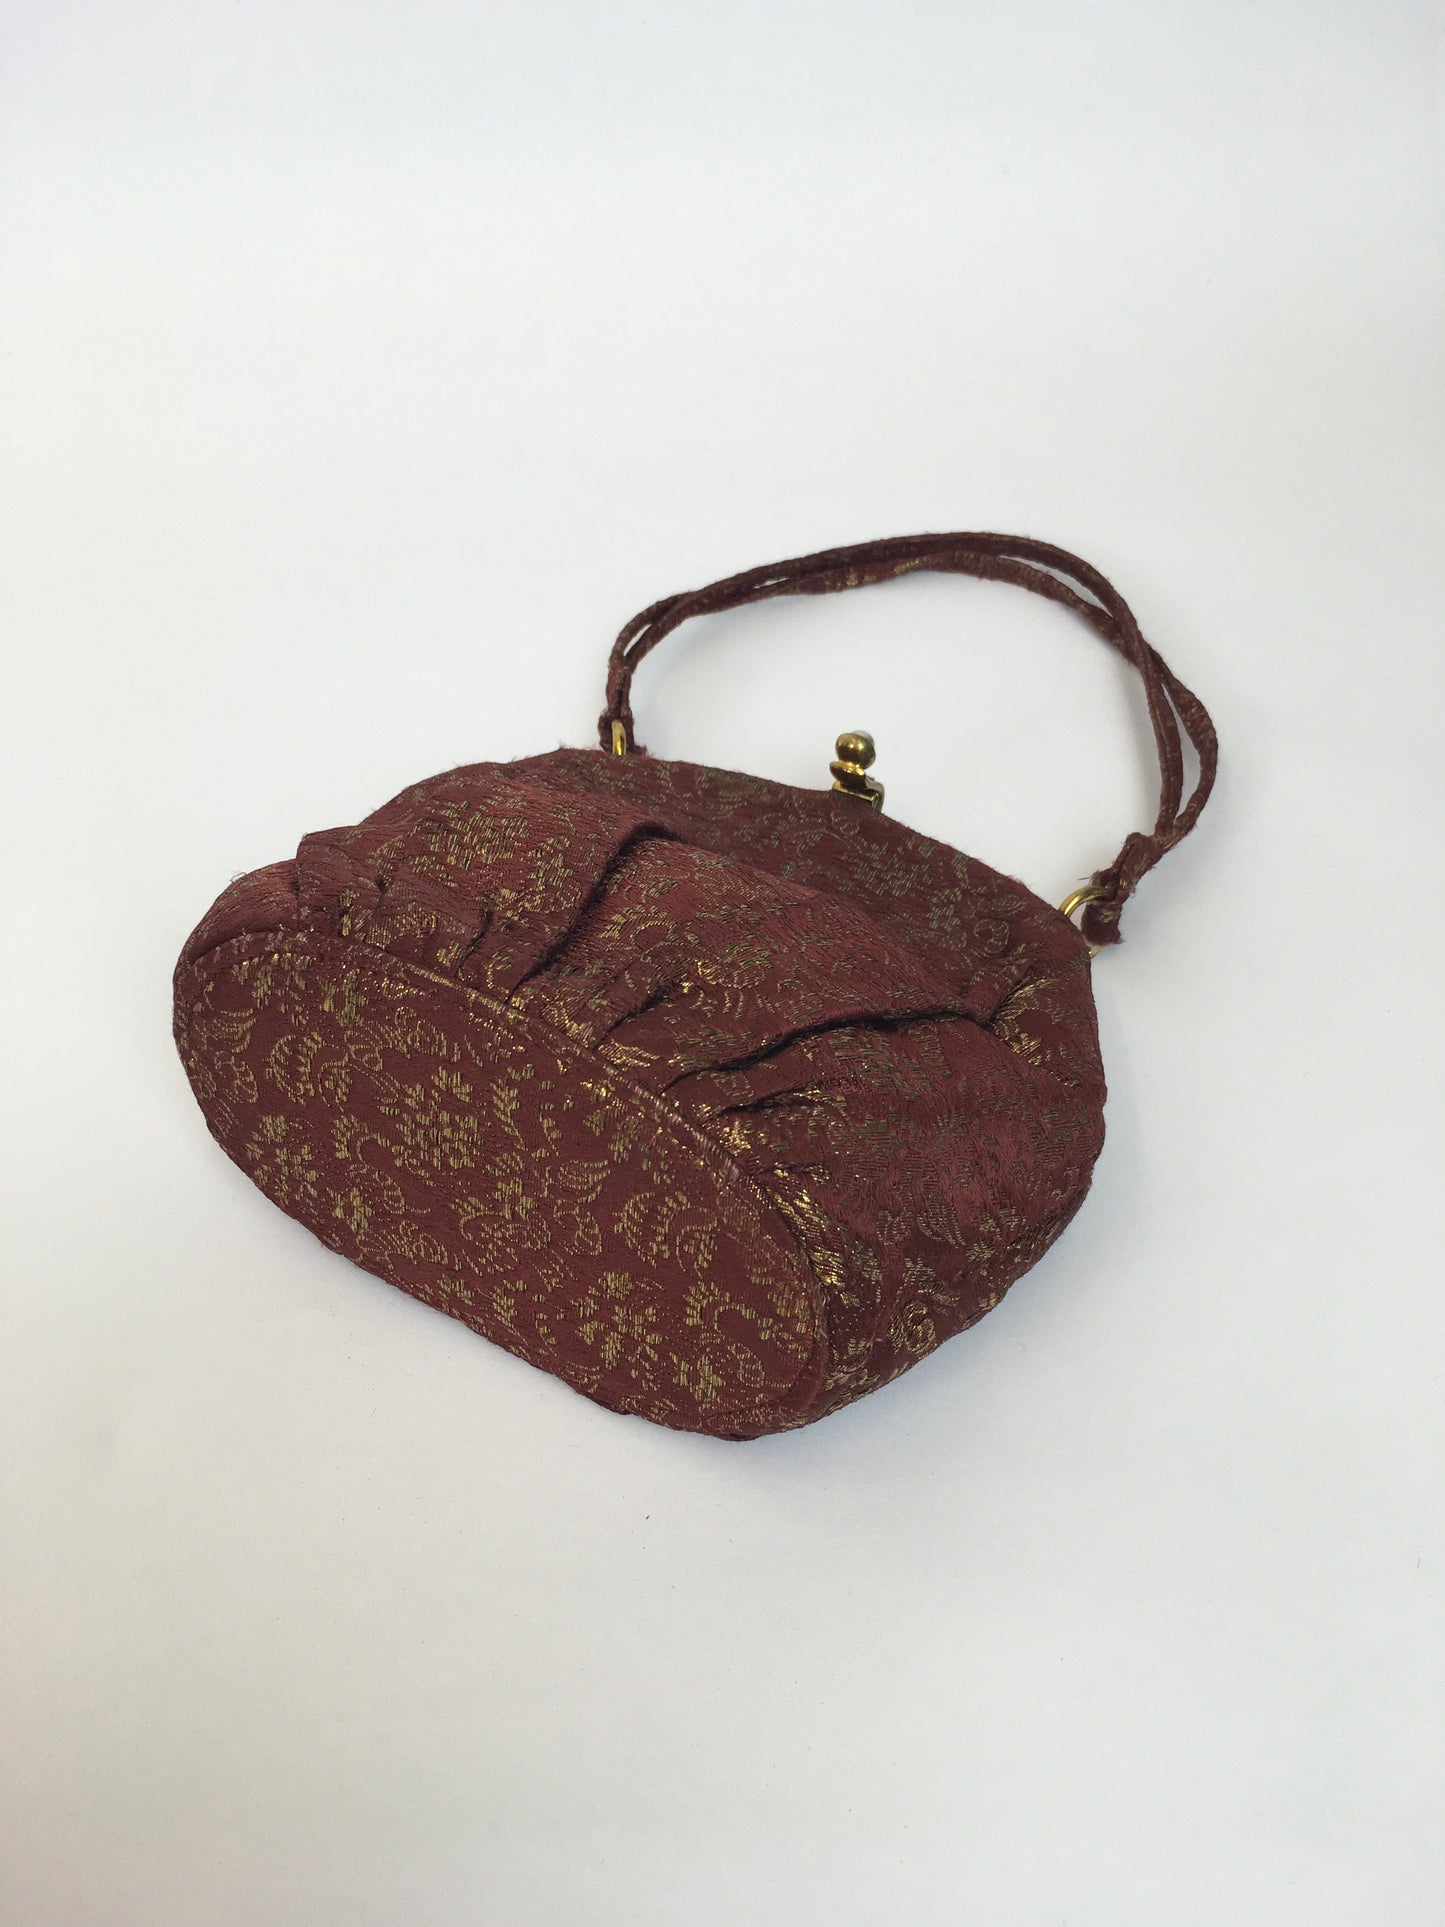 Original 1930’s Lame Evening Bag - In A Beautiful Burgundy with Gold Lame Floral Brocade